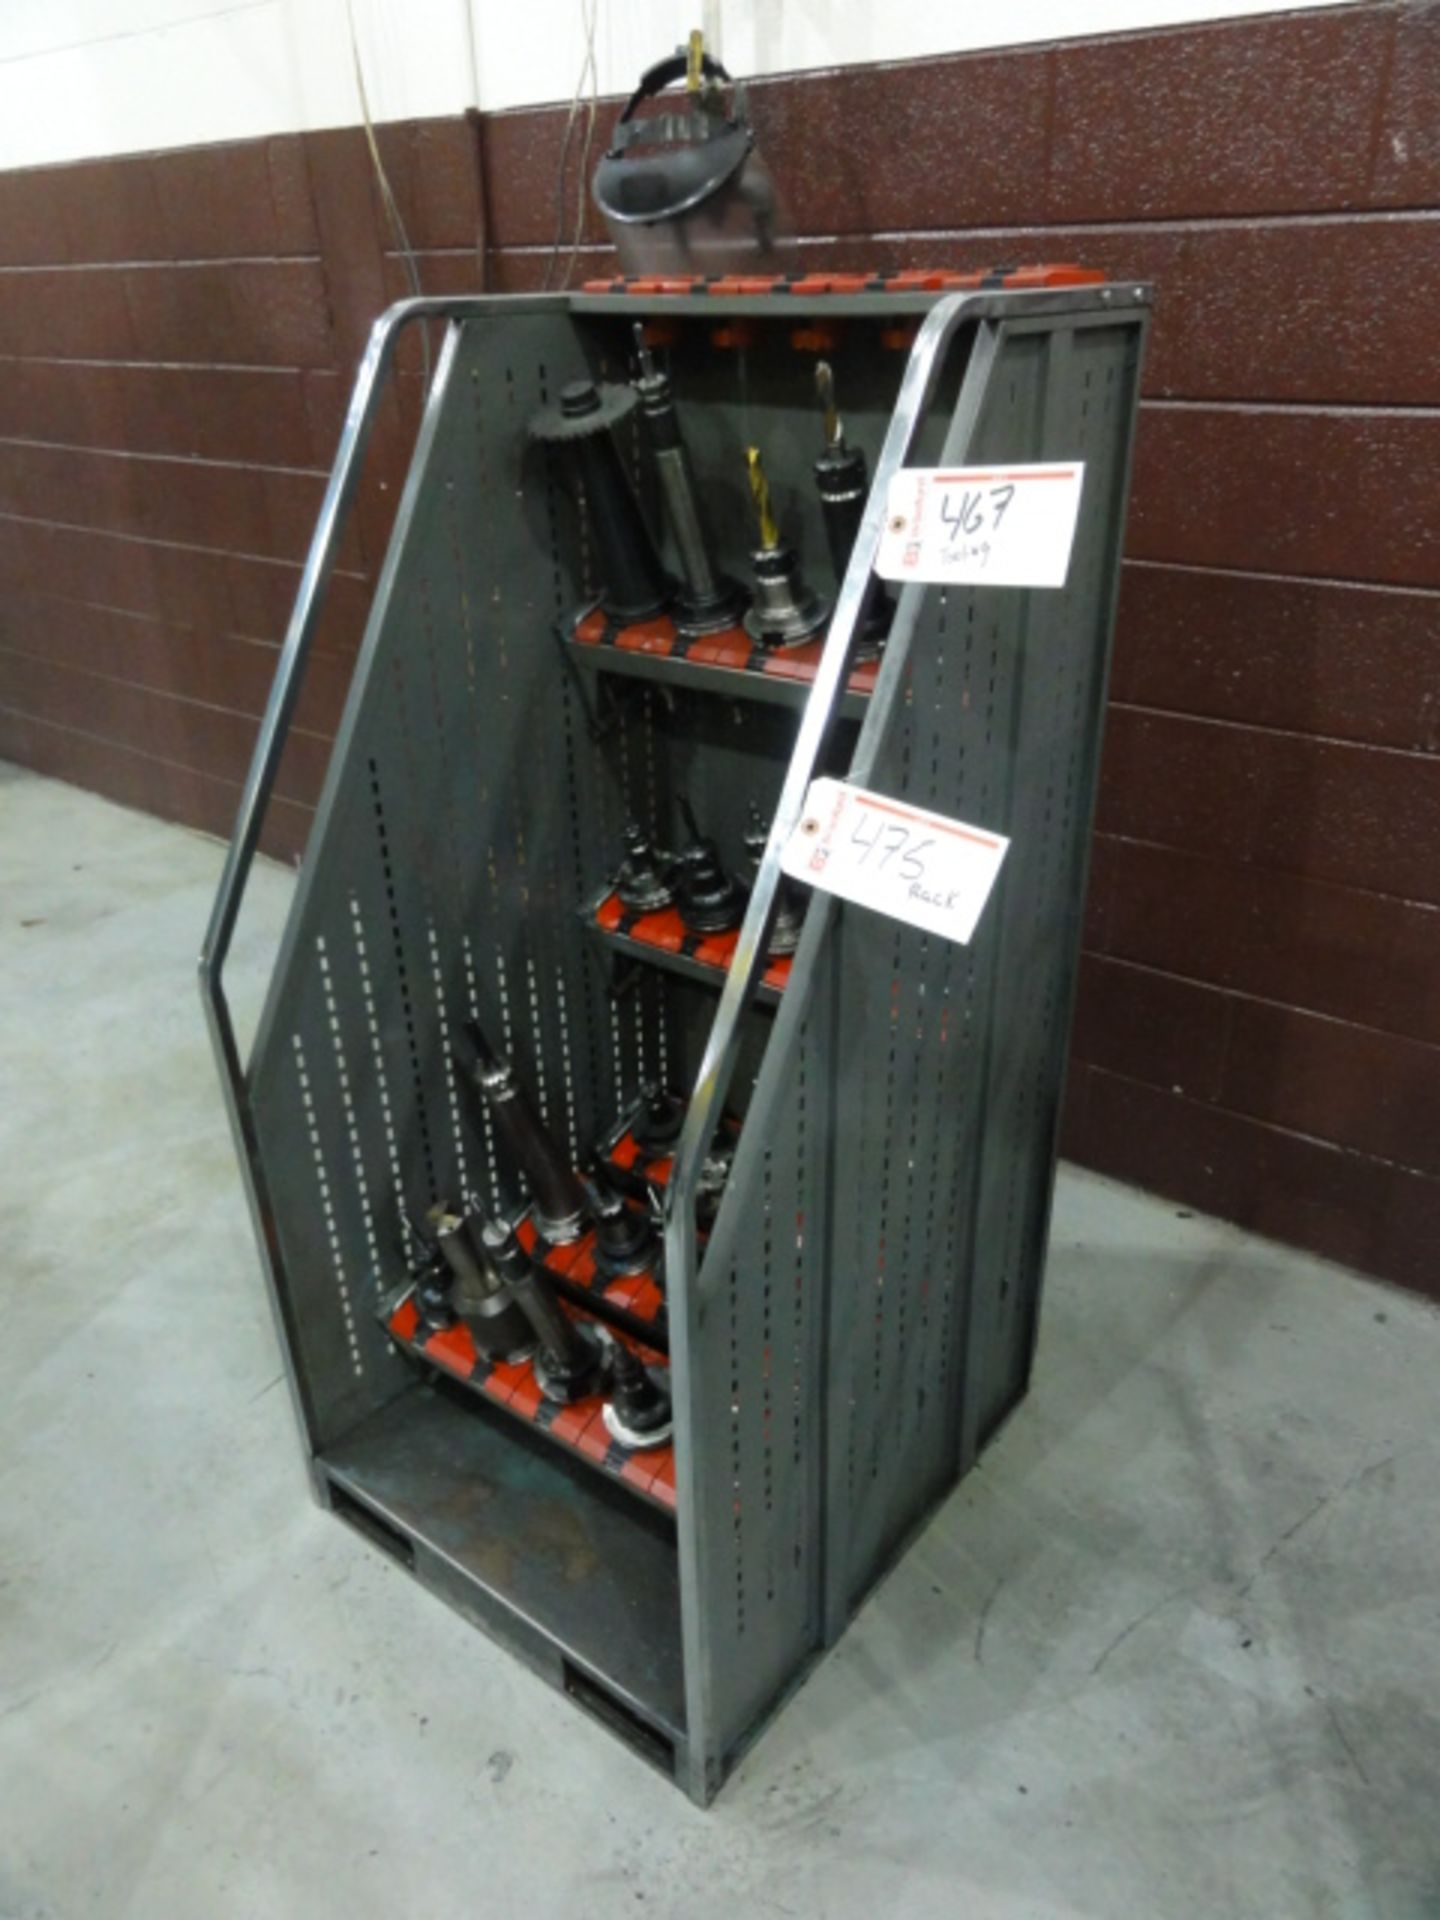 Stationary Adjustable Shelf CAT 50 Tool Racks w/ Forklift Mounts, Delayed Delivery Upon Removal of - Image 2 of 2